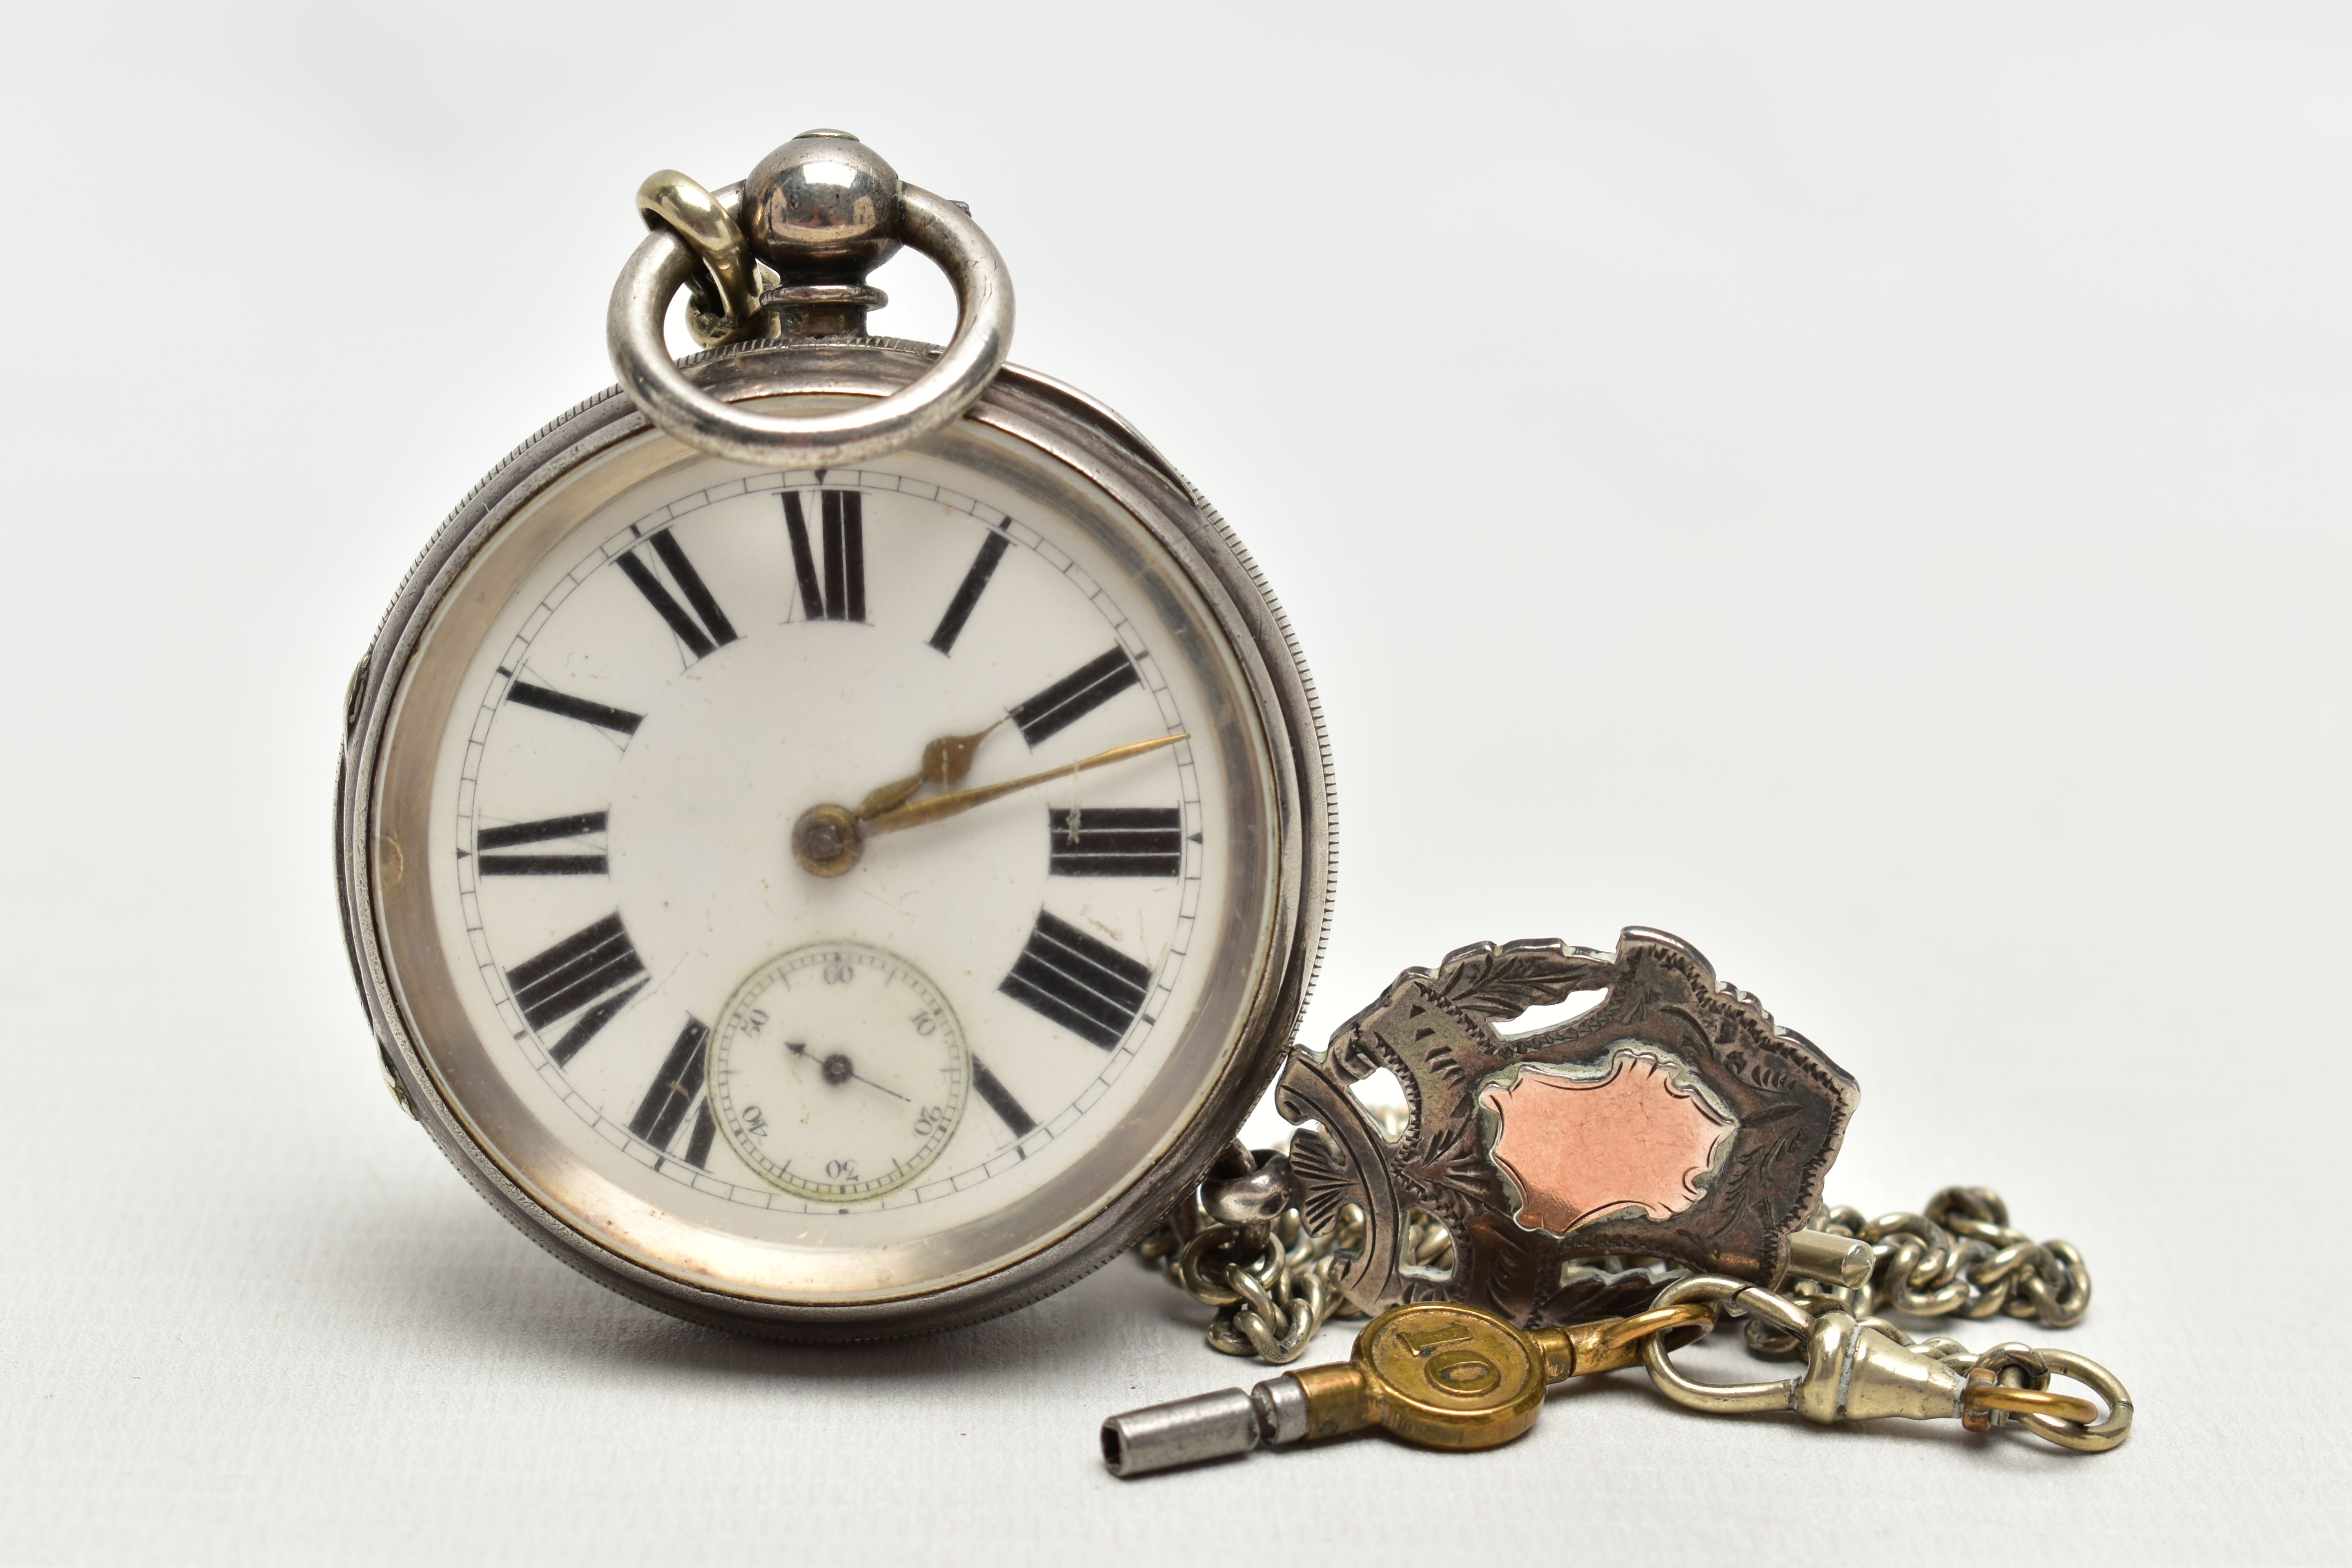 A SILVER OPEN FACE POCKET WATCH WITH ALBERT CHAIN AND FOB, key wound pocket watch featuring a